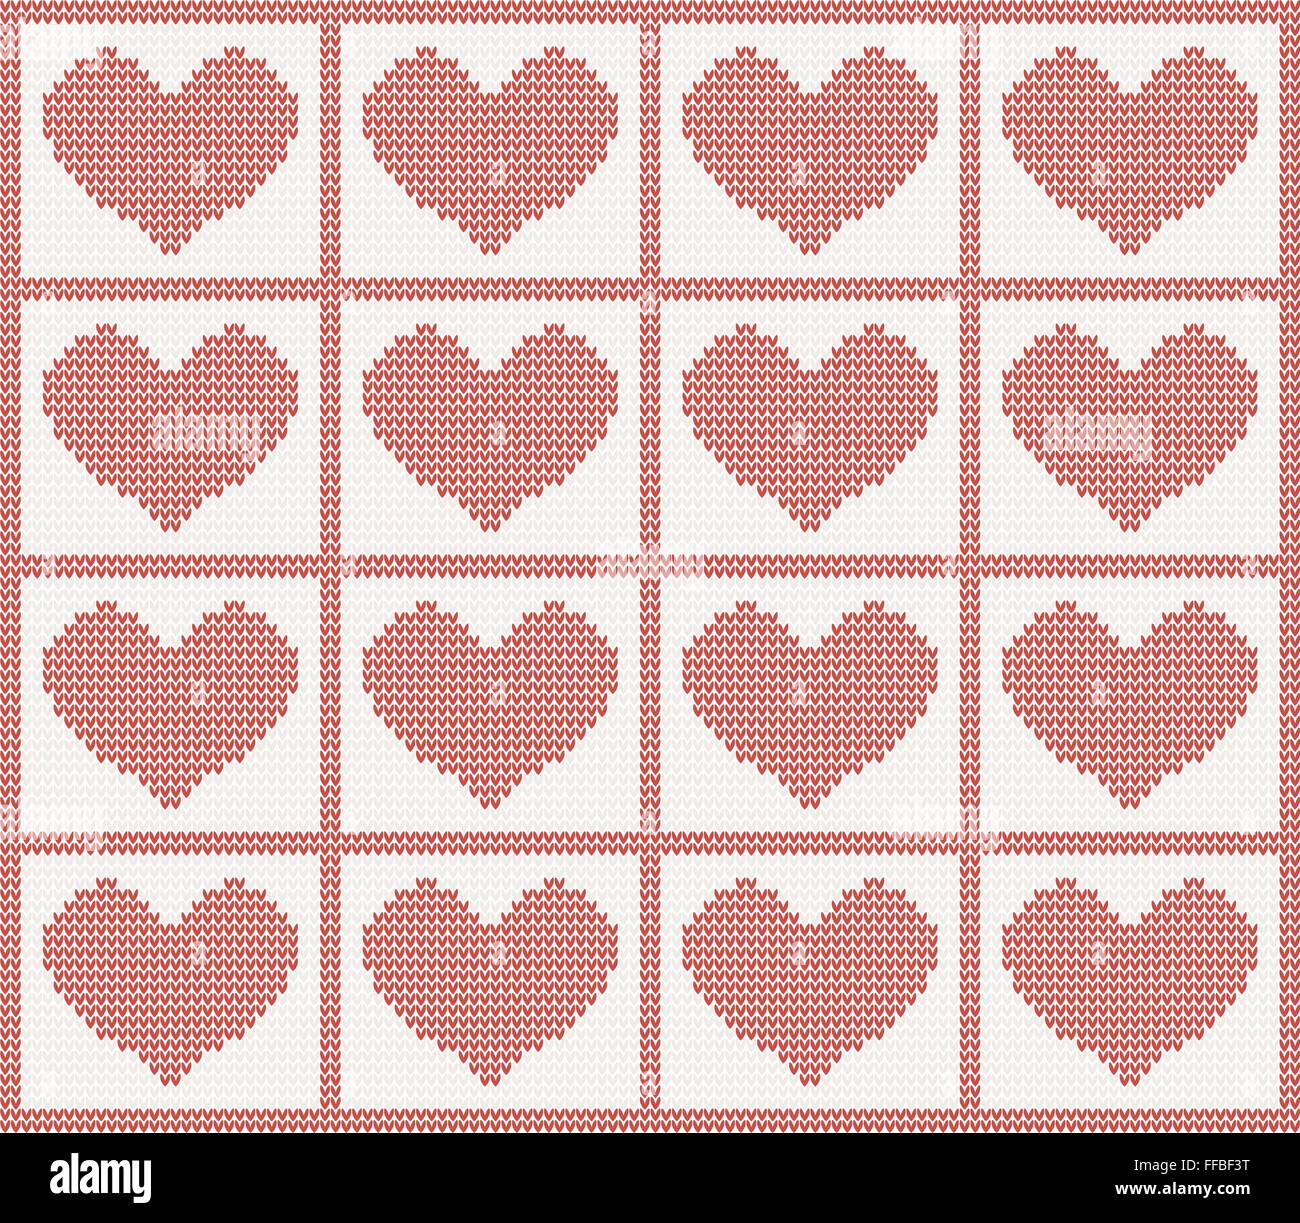 knitted vector pattern with hearts Stock Vector